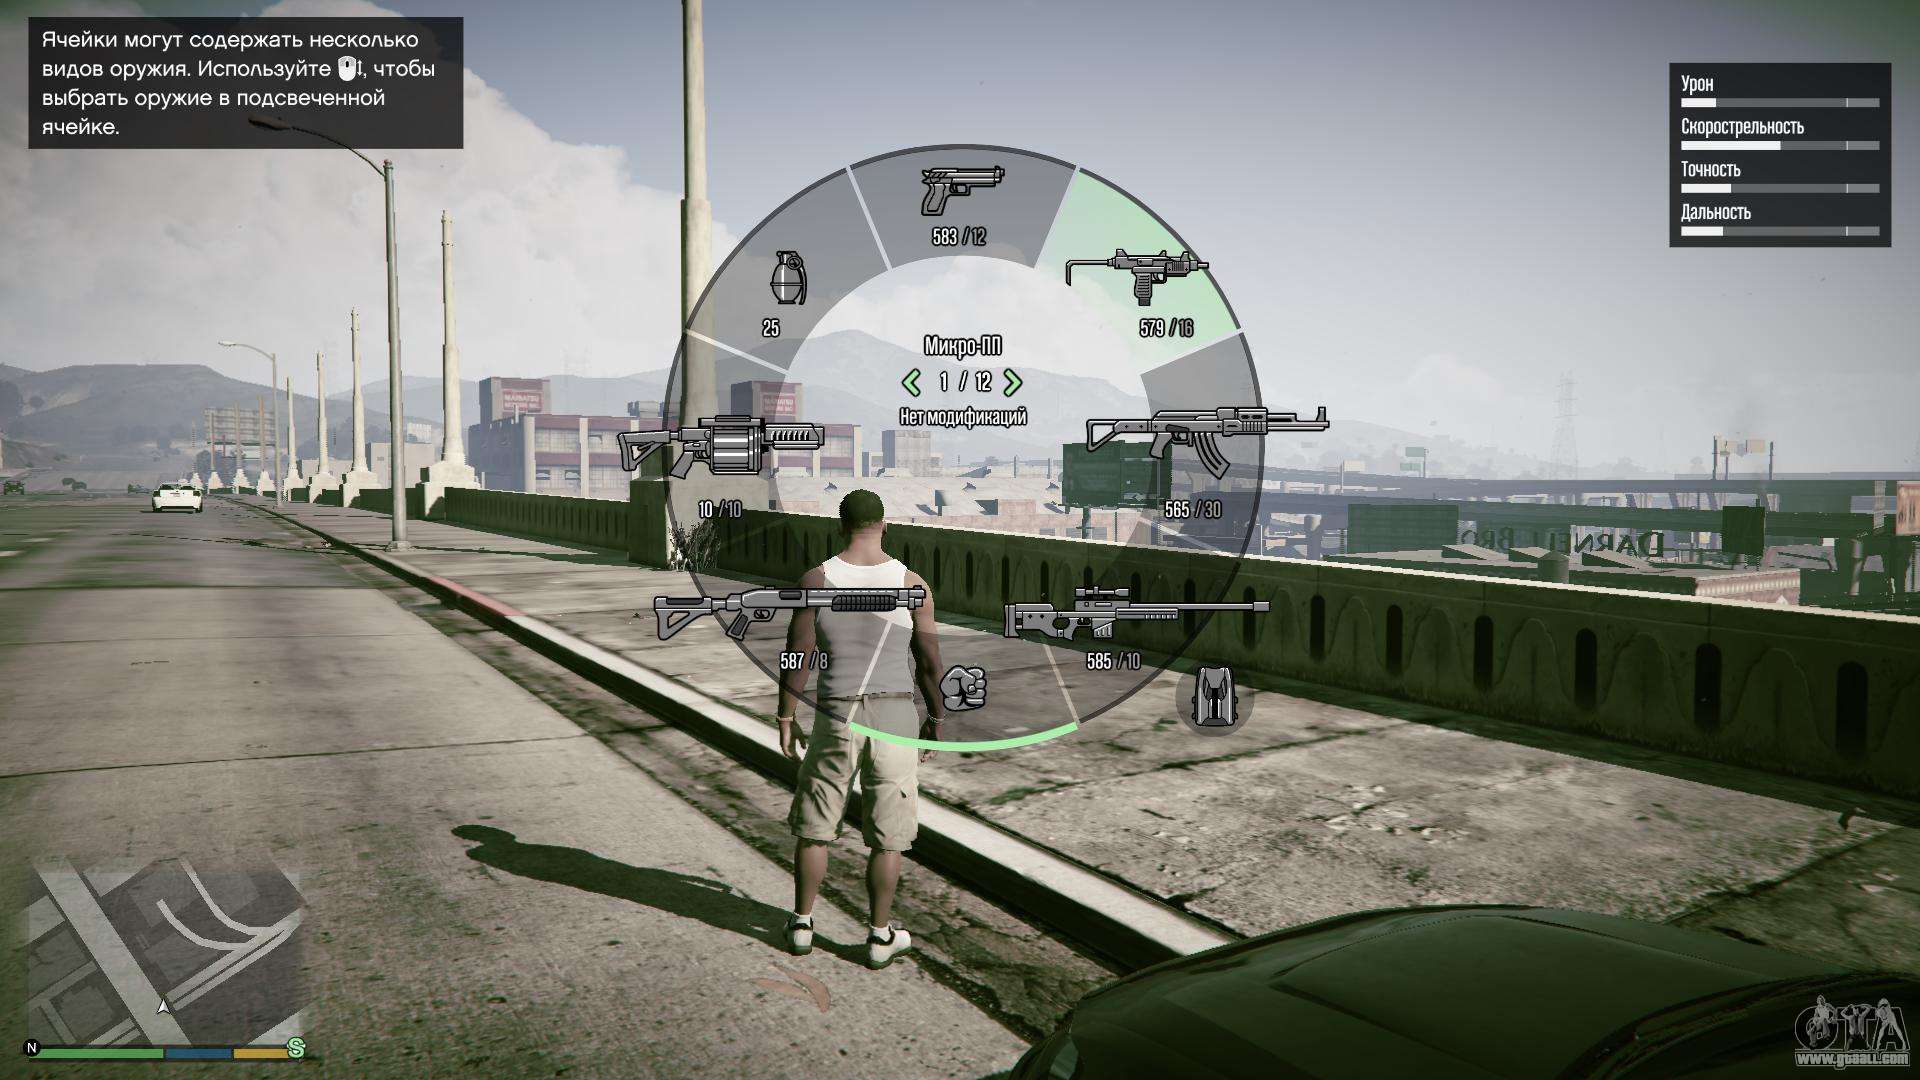 How to remove the interface in GTA 5 online